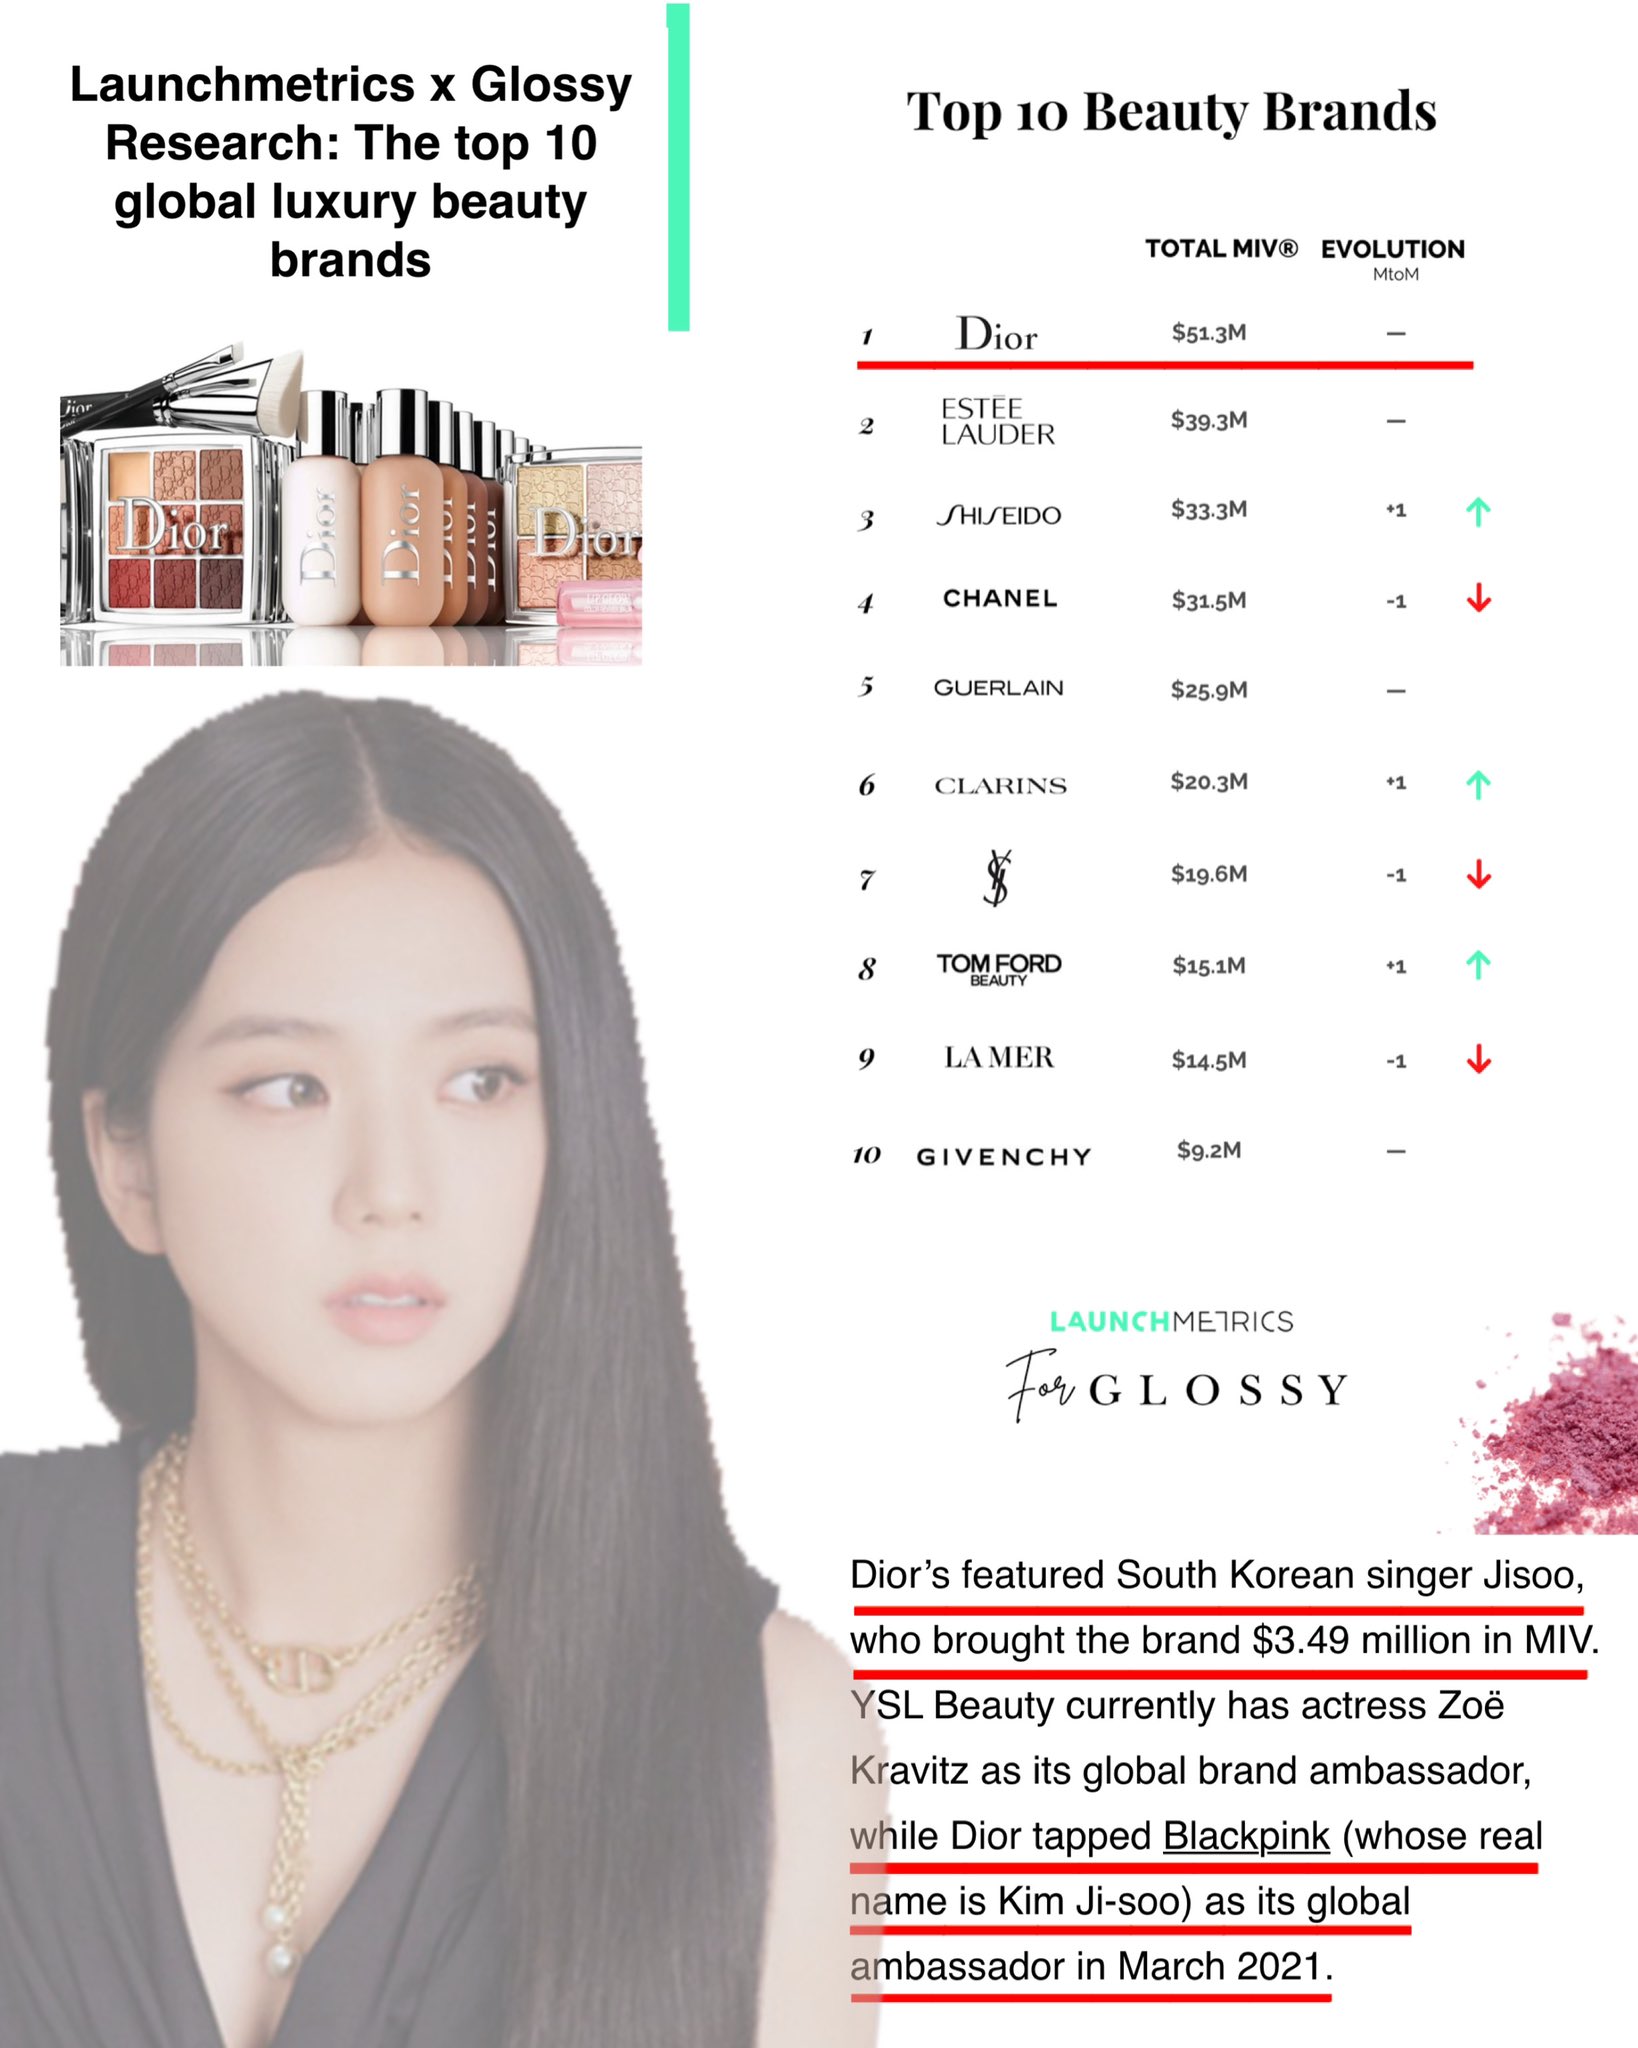 𝕁𝕀𝕊𝕆𝕆 𝕃𝕀𝔹ℝ𝔸ℝ𝕐 on X: [Ɪɴꜰᴏ] Dior remains #1 in ranking of The Top  10 Global Luxury Beauty Brands based on MIV for M